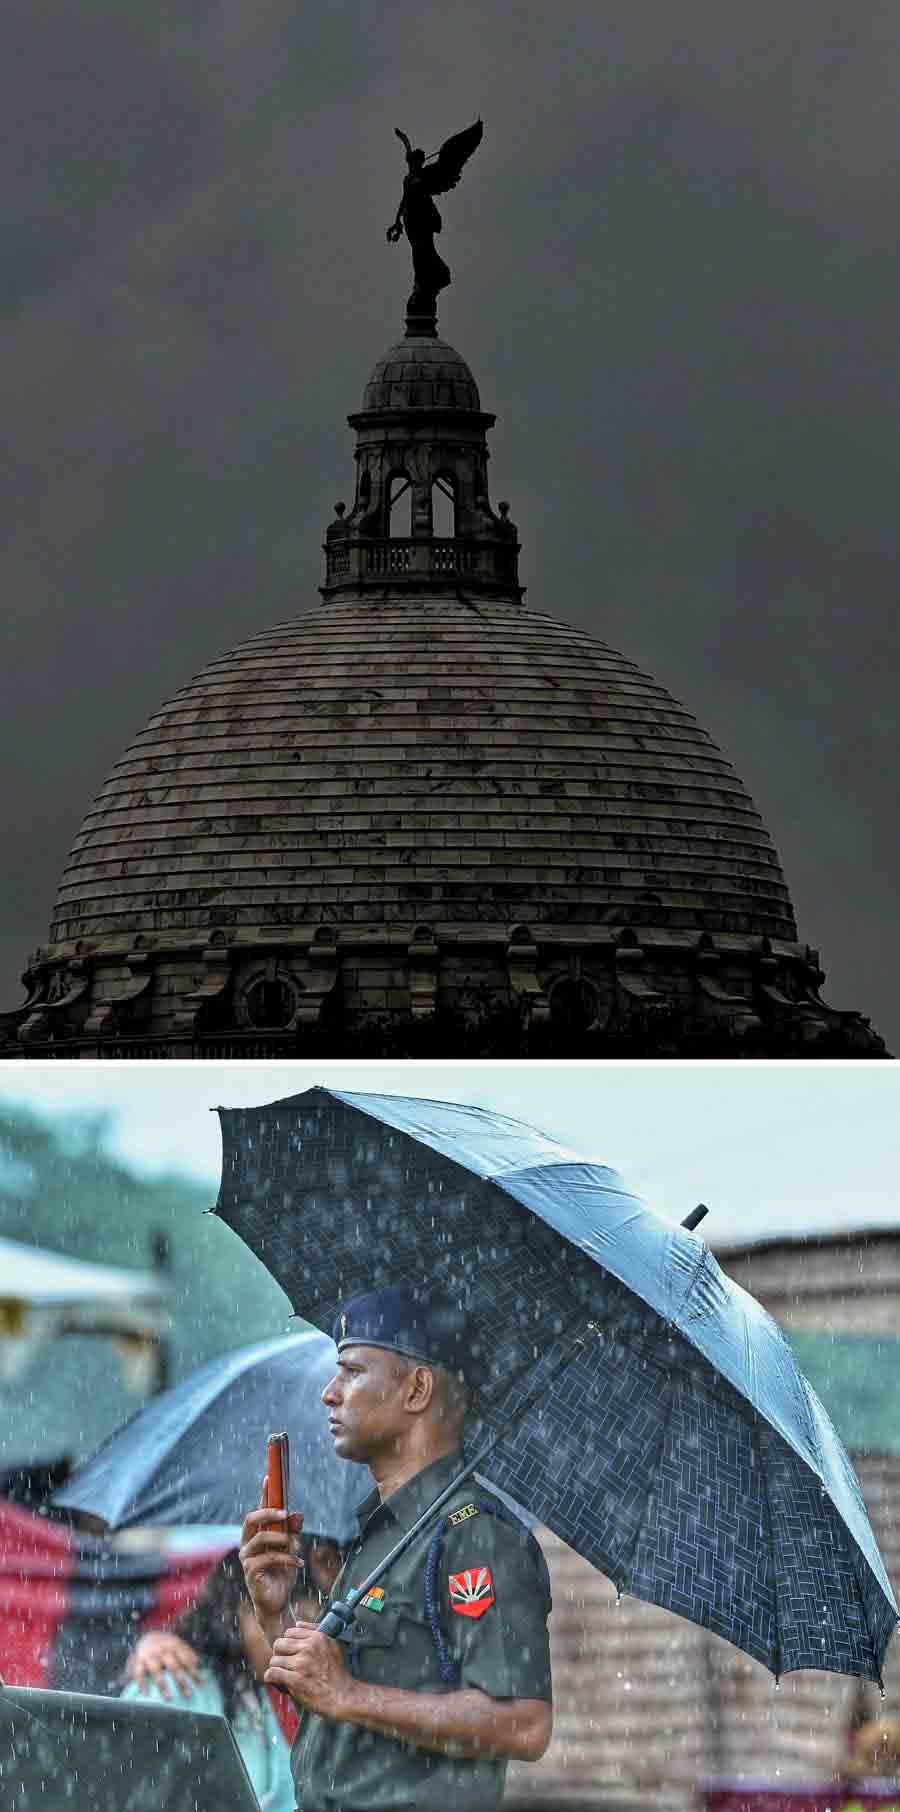 It was a rainy day in Kolkata on Tuesday. Parts of West Bengal have been receiving light to moderate rainfall for the past few days 